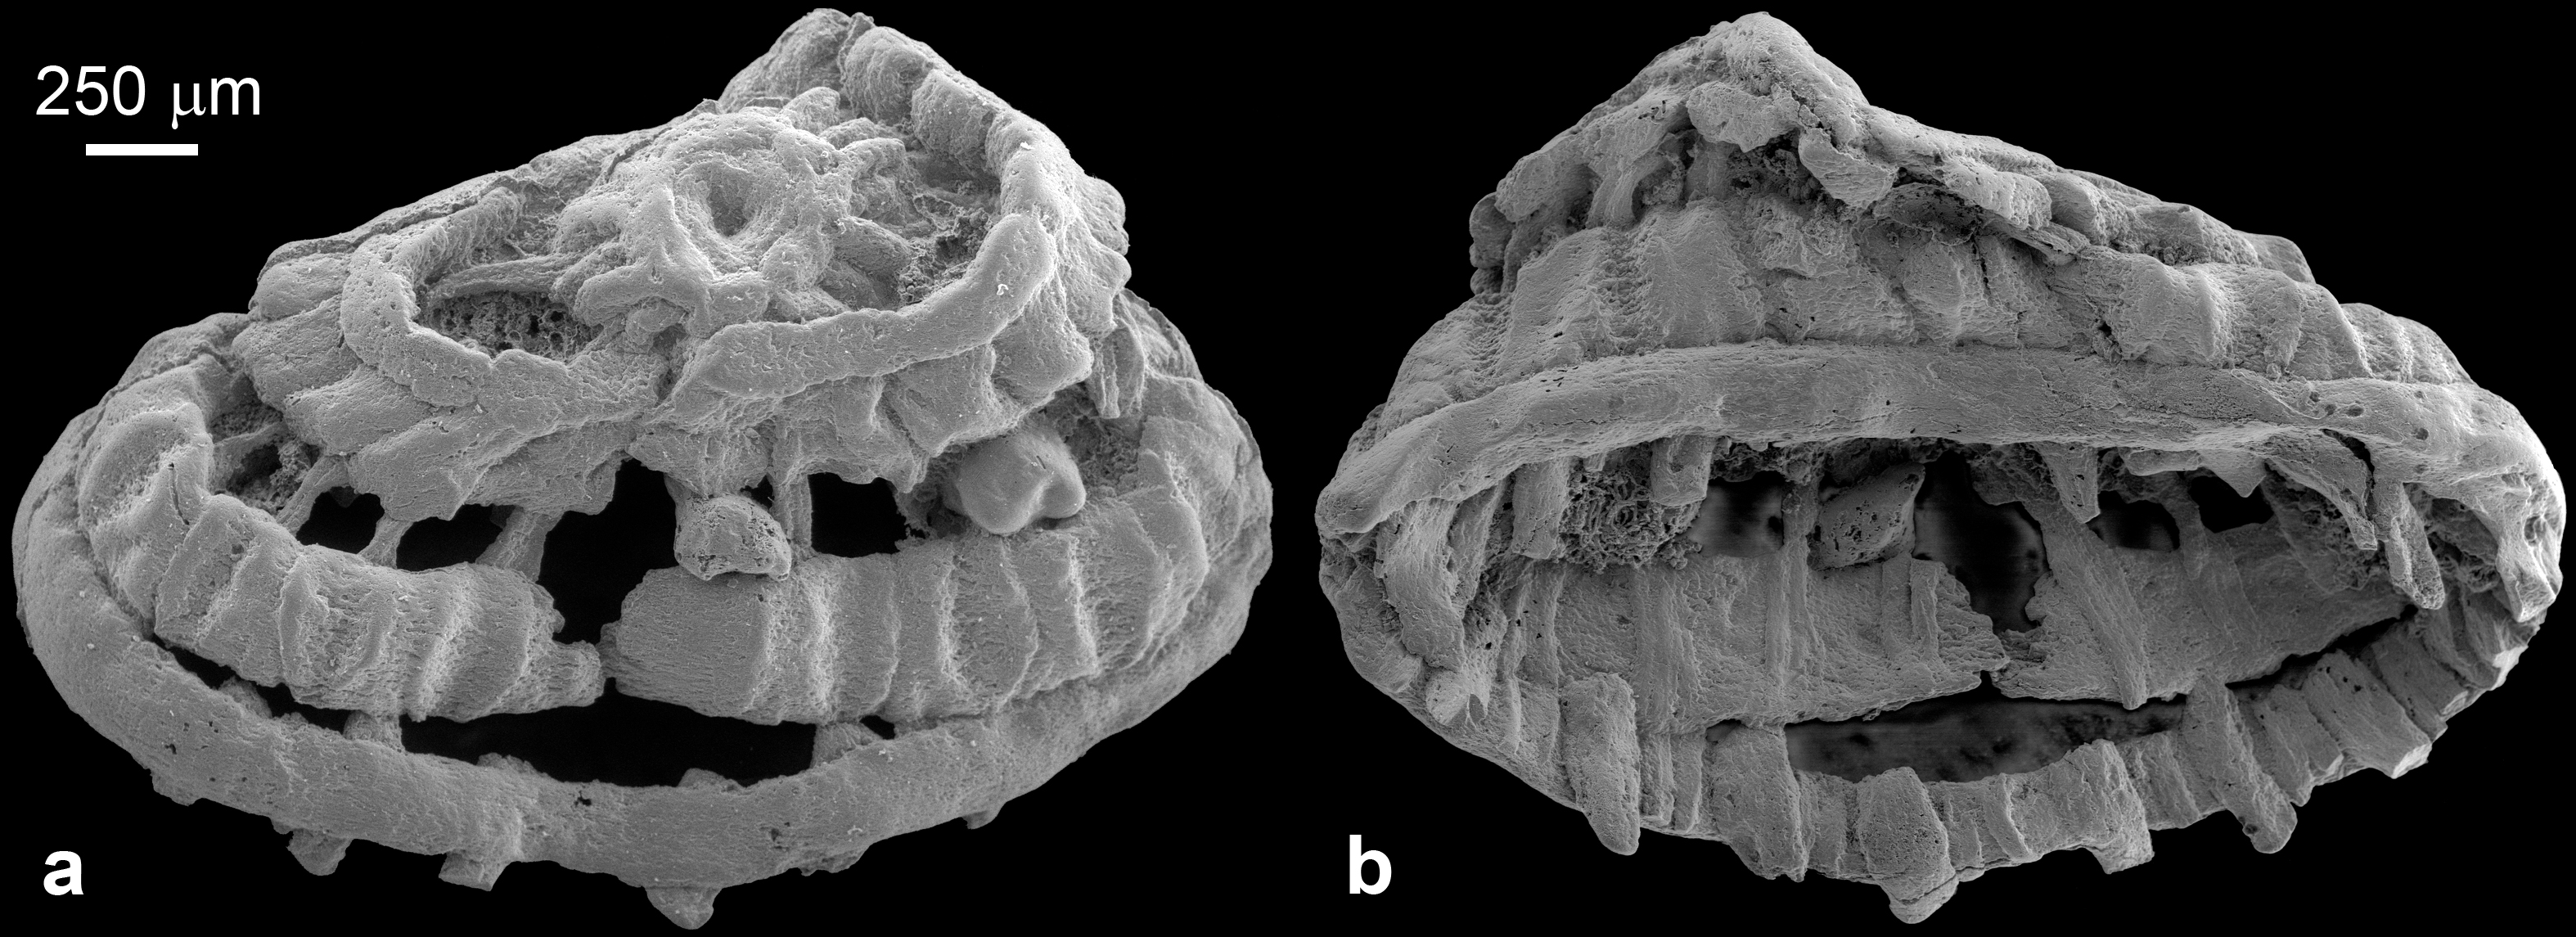 Electron microscope scanned image shows the musculature of the specimen of cycloneuralians. /courtesy of Zhang Huaqiao